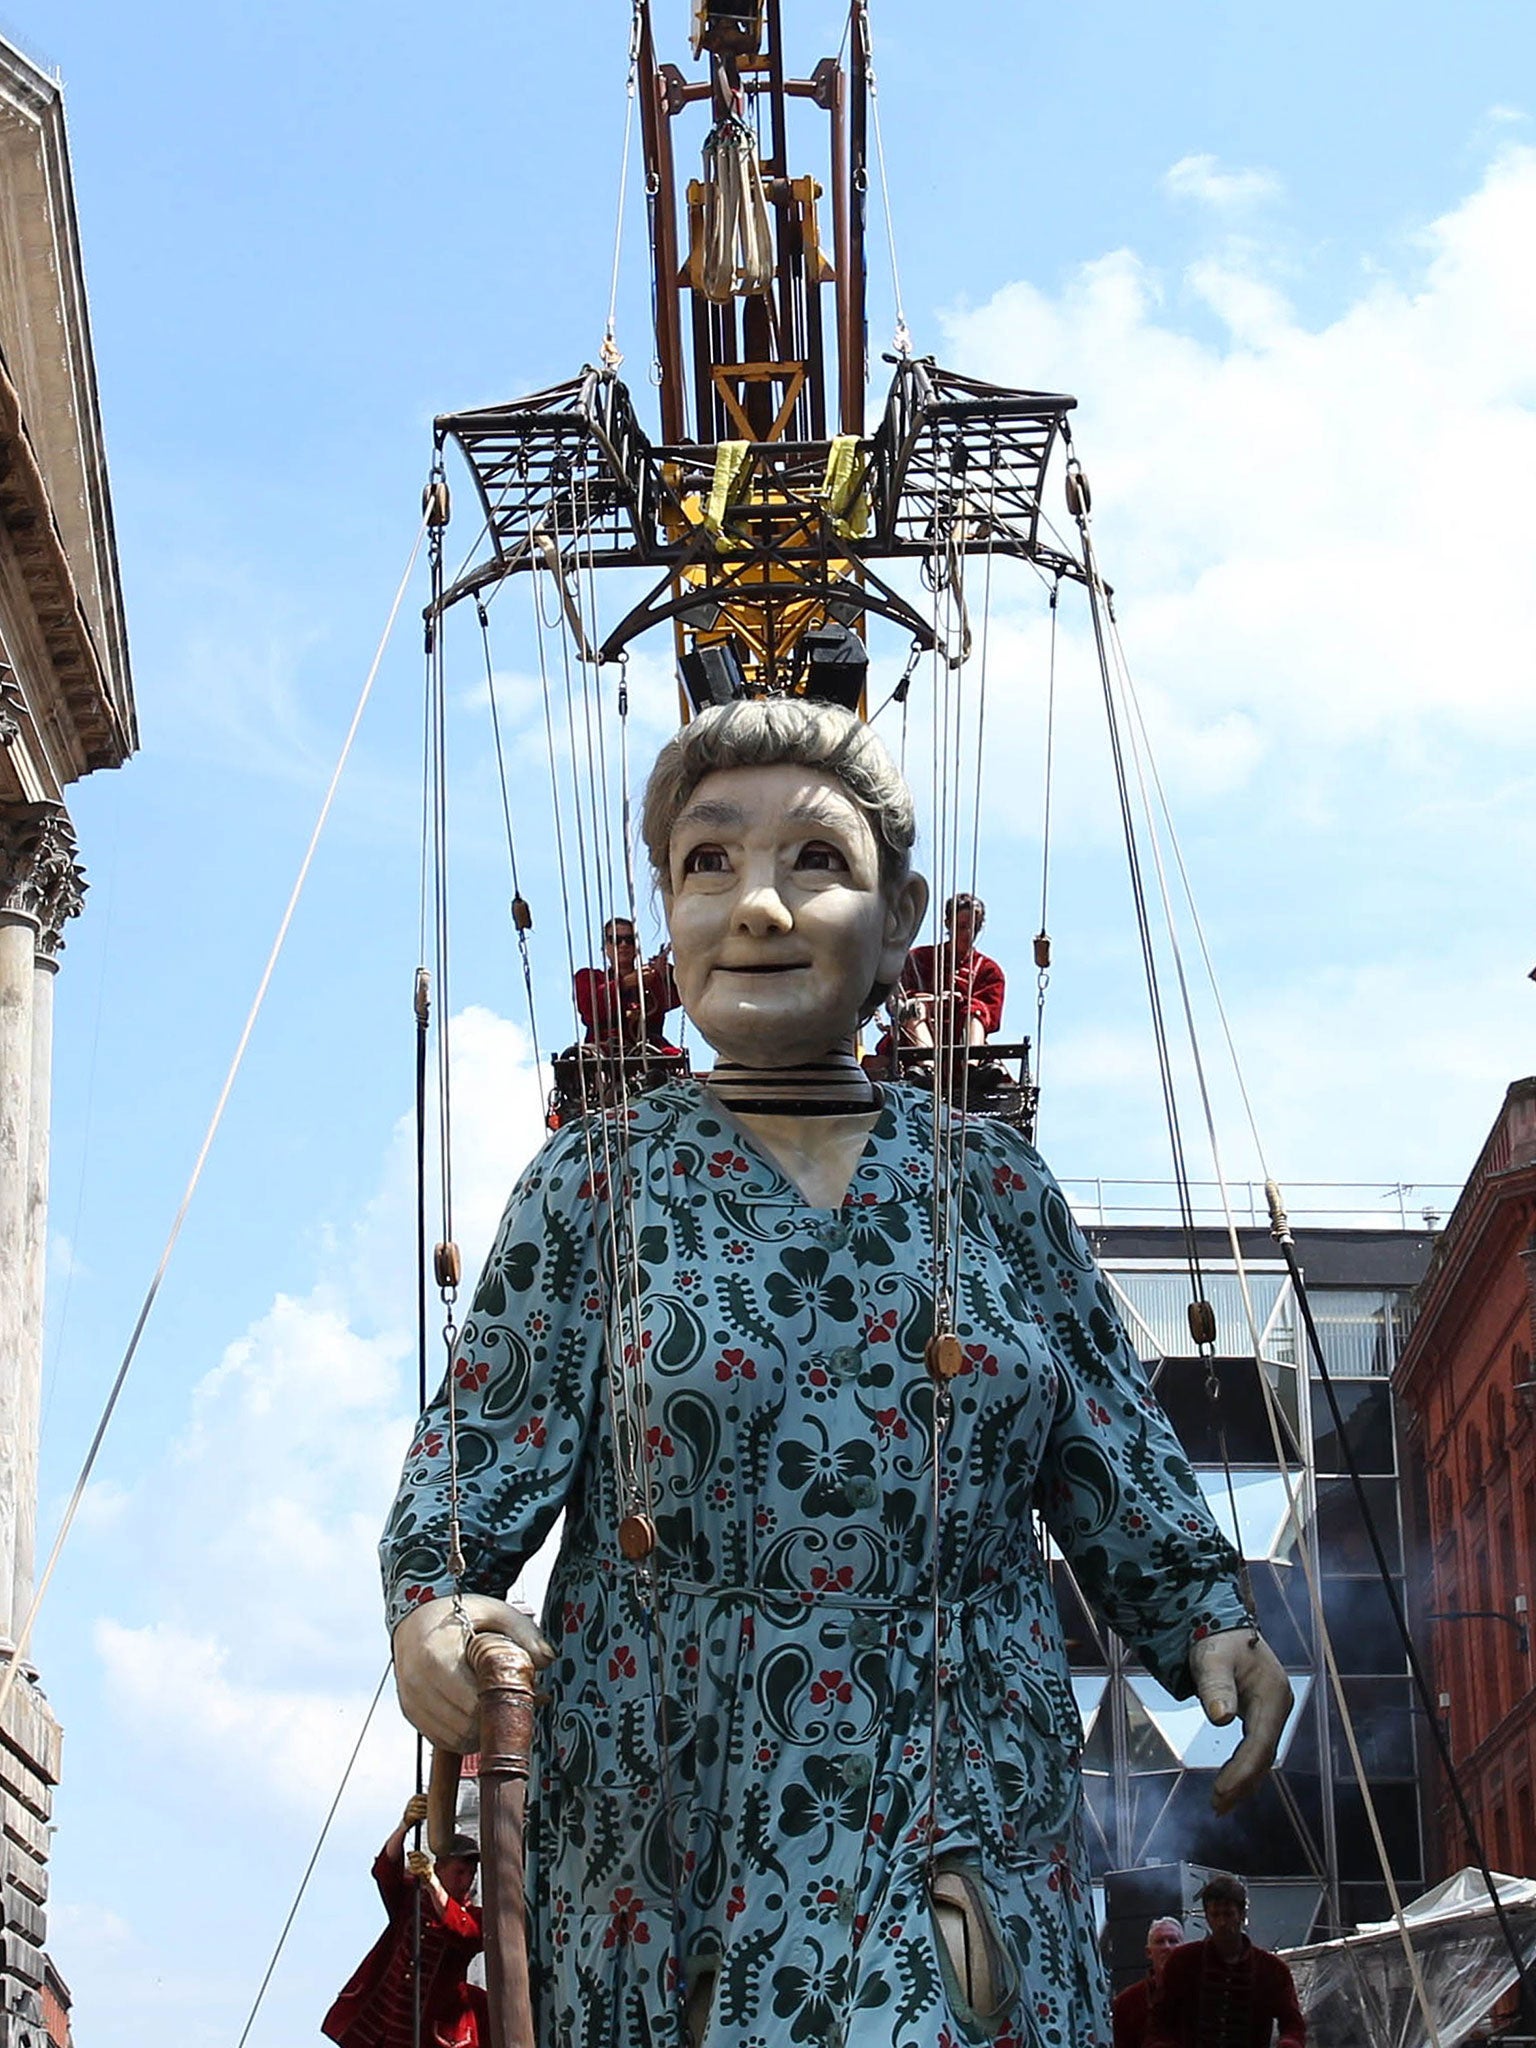 Giant Grandmother, Marionette